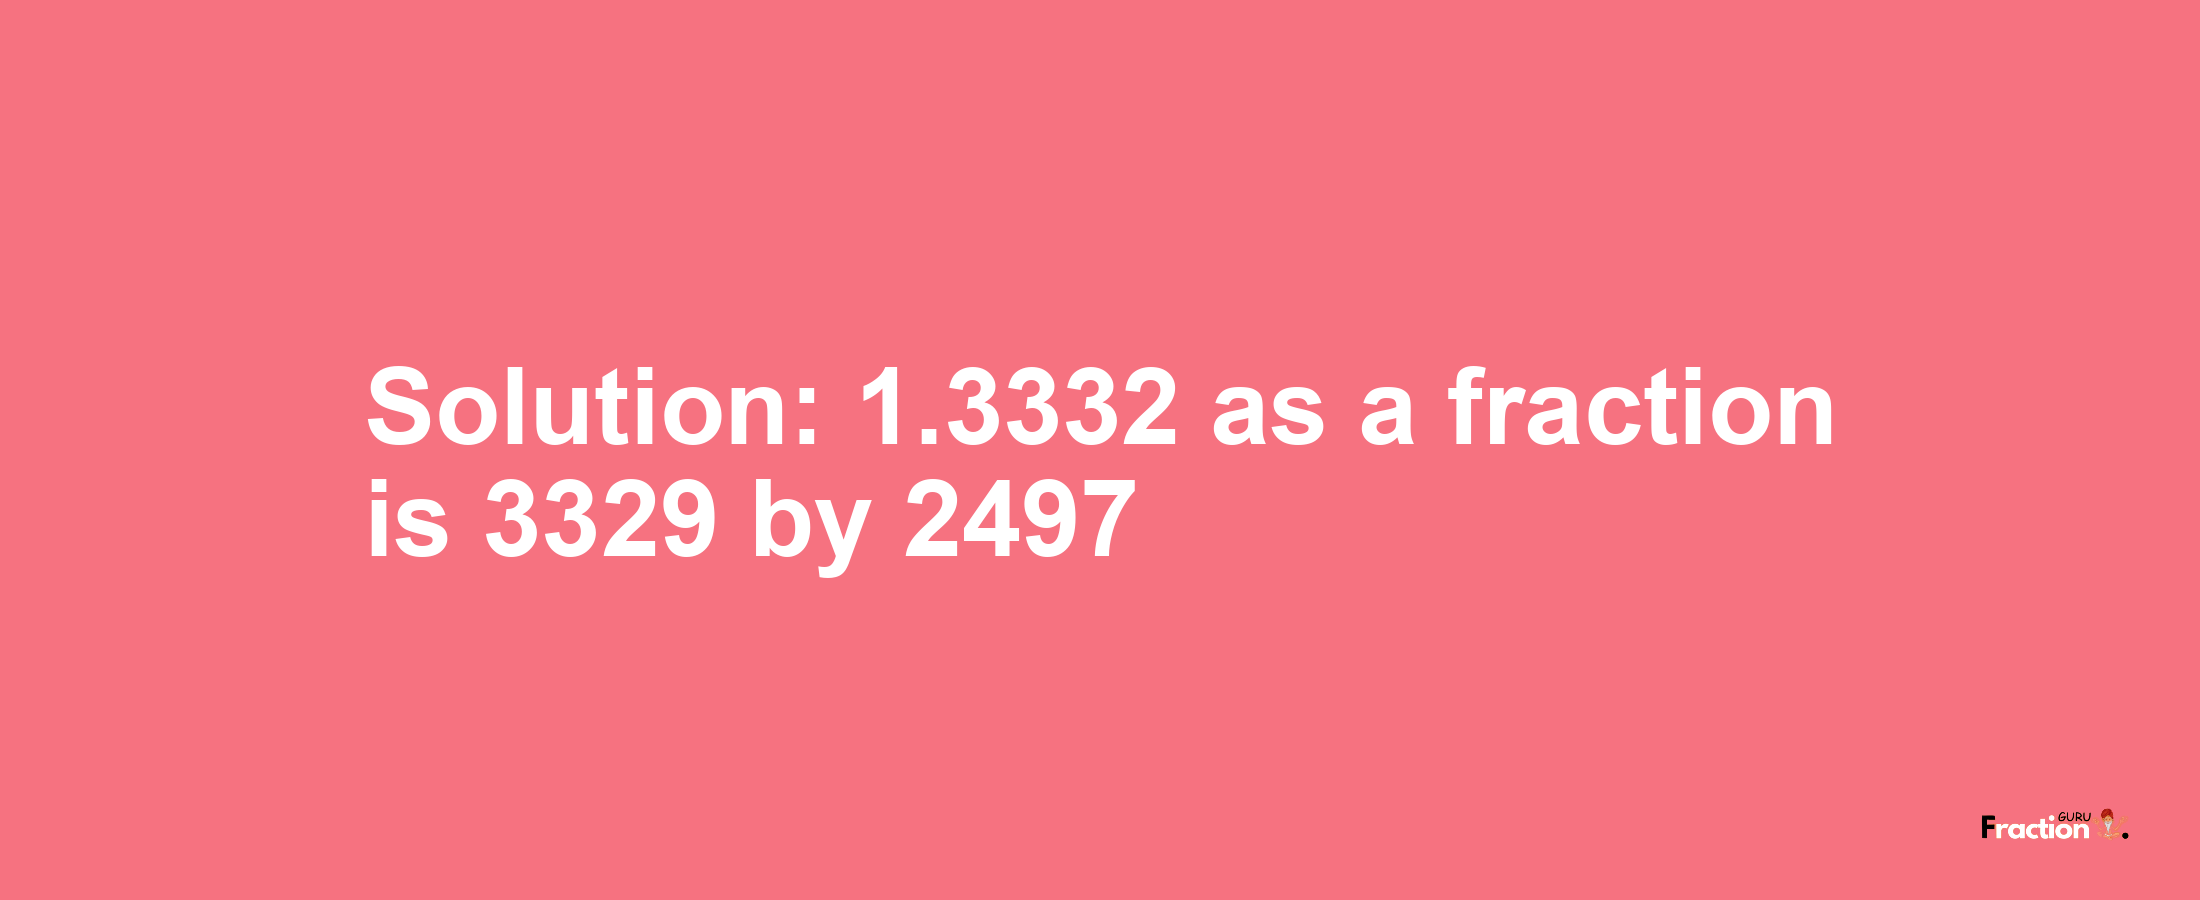 Solution:1.3332 as a fraction is 3329/2497